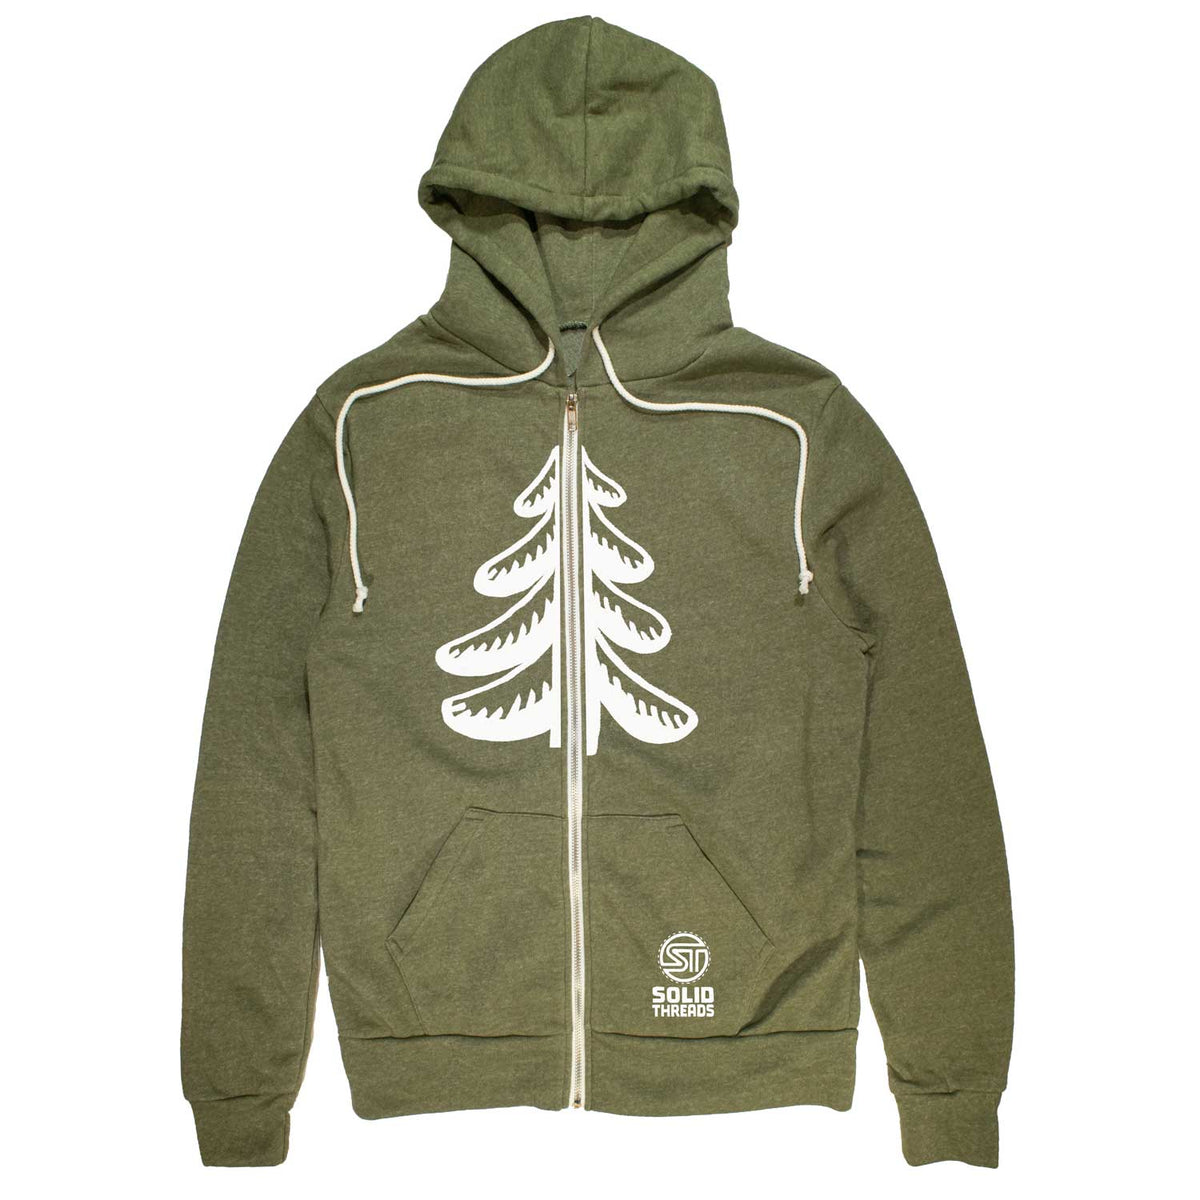 Flowing Pine Tree Vintage Zip Up Hoodie | Cool Forest Aesthetic Graphic | Solid Threads